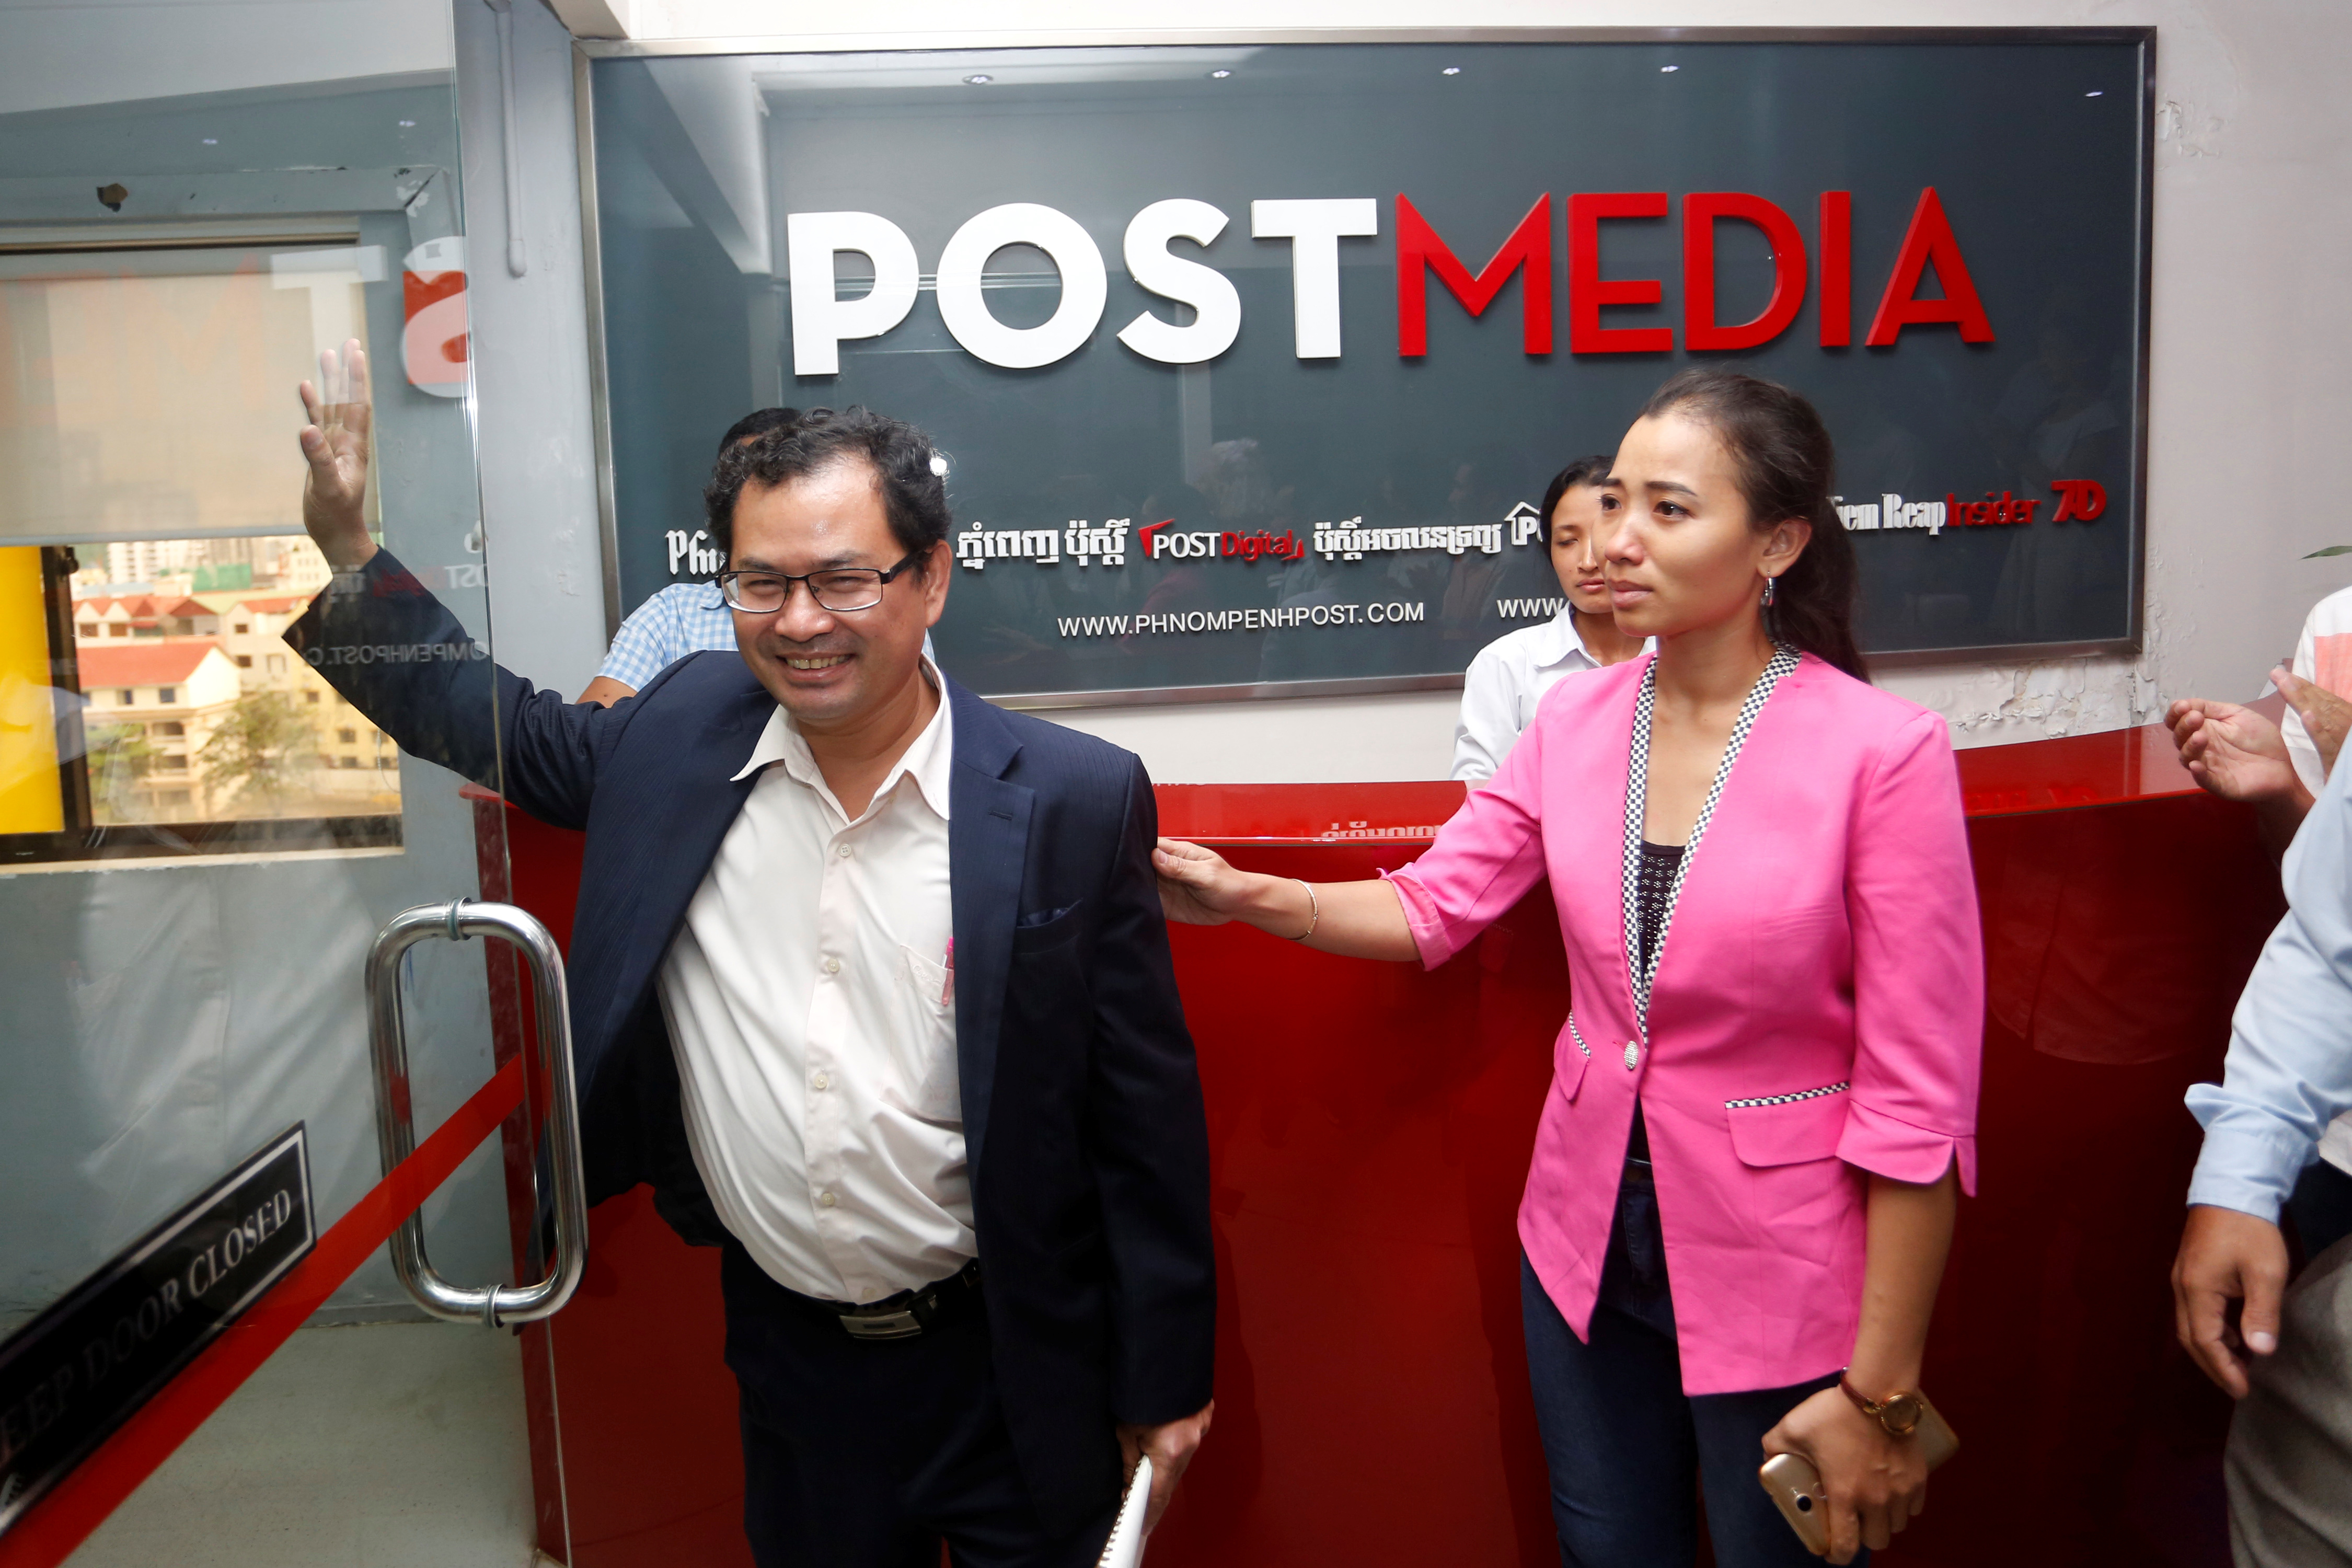 Phnom Penh Post Editor-in-Chief Kay Kimsong (left) and chief of staff Chhay Channyda, after Kimsong was fired on May 7, 2018. (Stringer—Reuters)